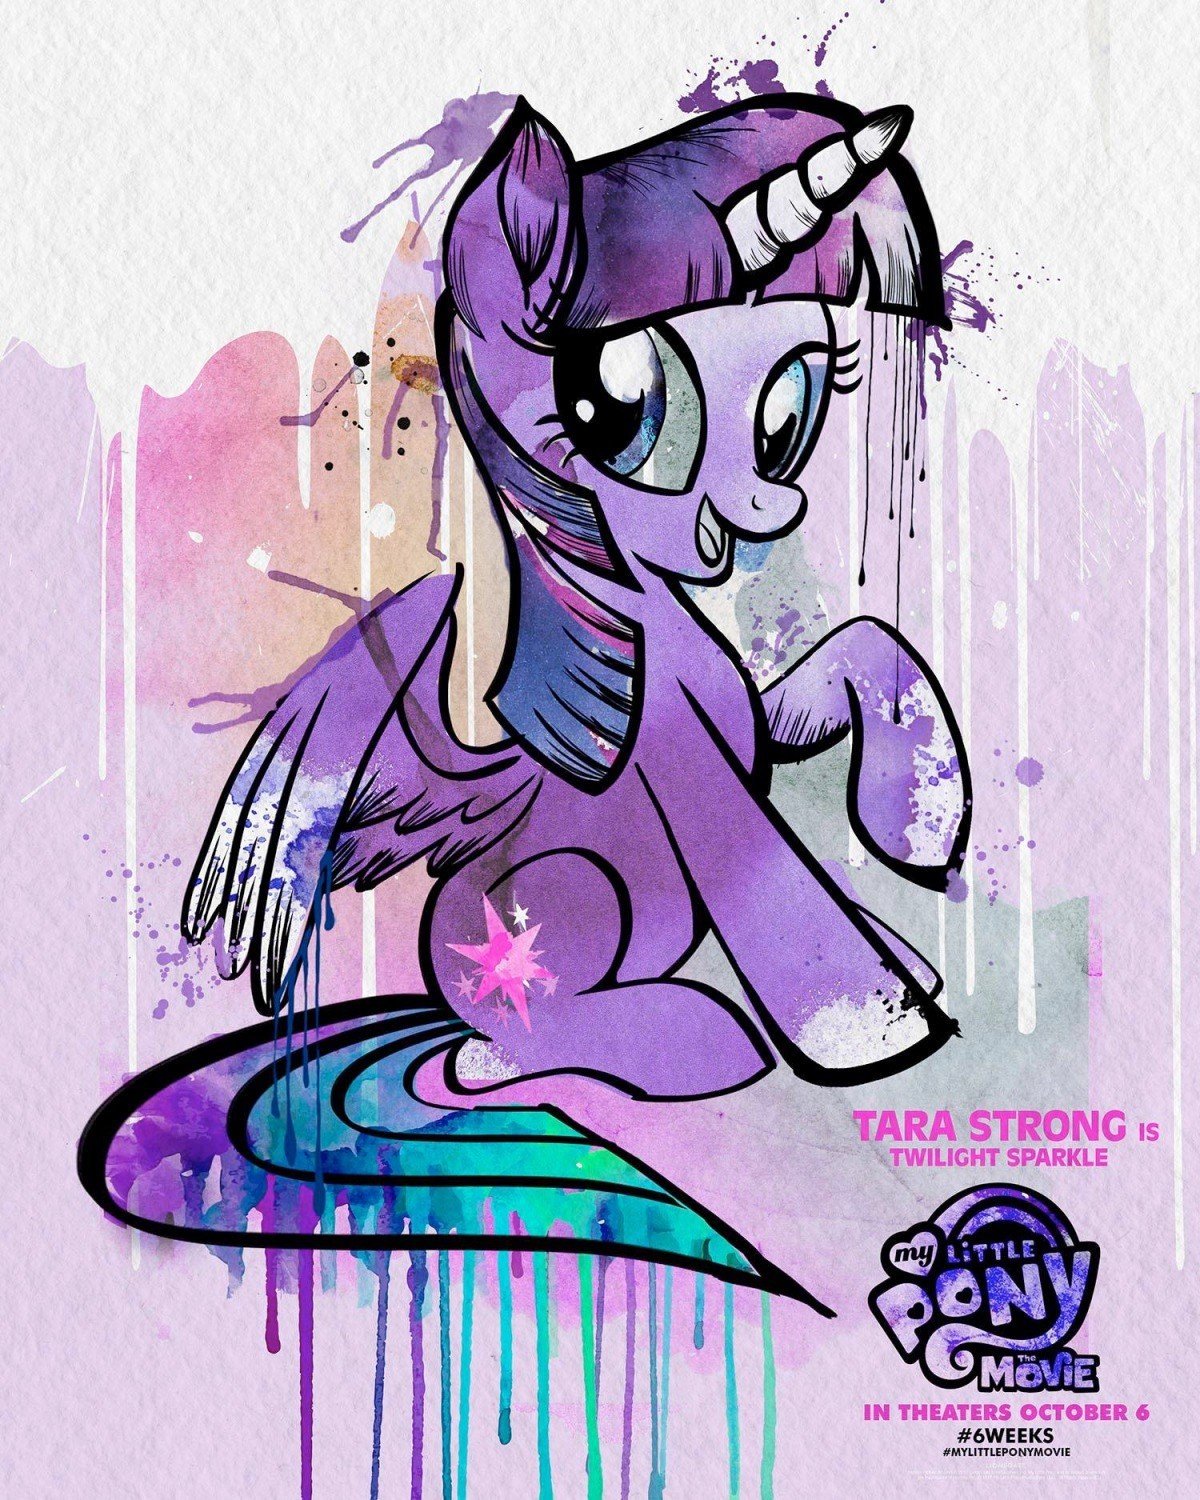 Poster of Lionsgate Films' My Little Pony: The Movie (2017)